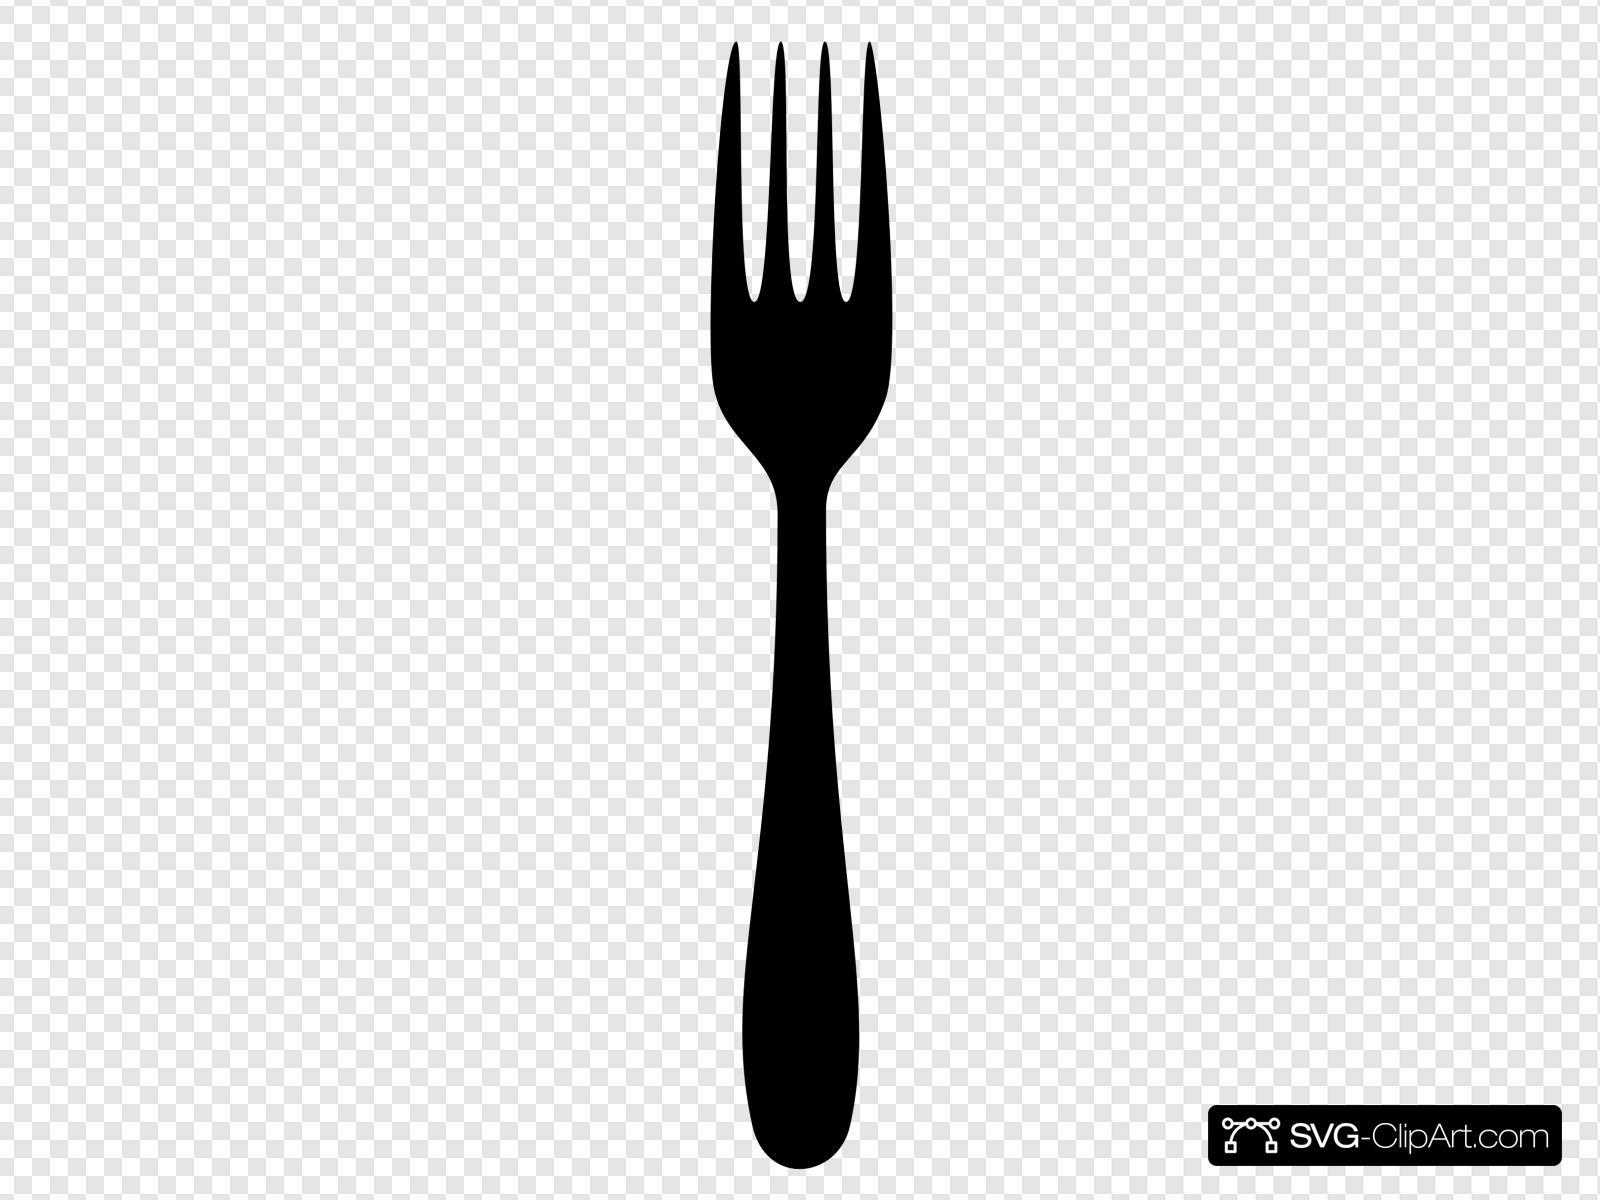 Fork Clip art, Icon and SVG